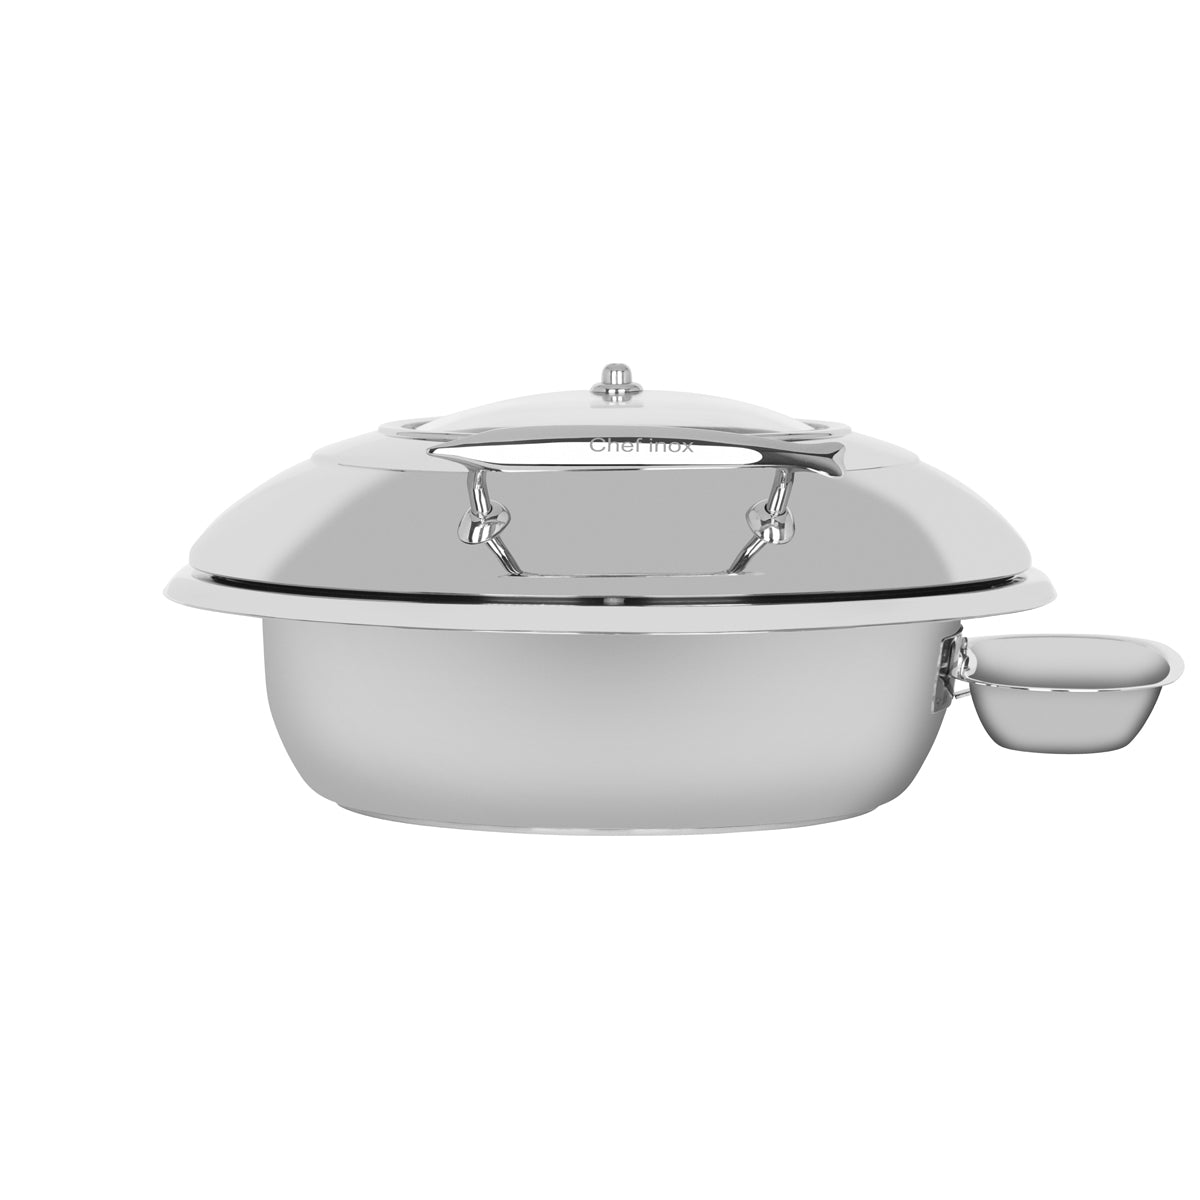 54916 Chef Inox Delux Chafer Round 18/8 Stainless Steel Large with Glass Lid Tomkin Australia Hospitality Supplies